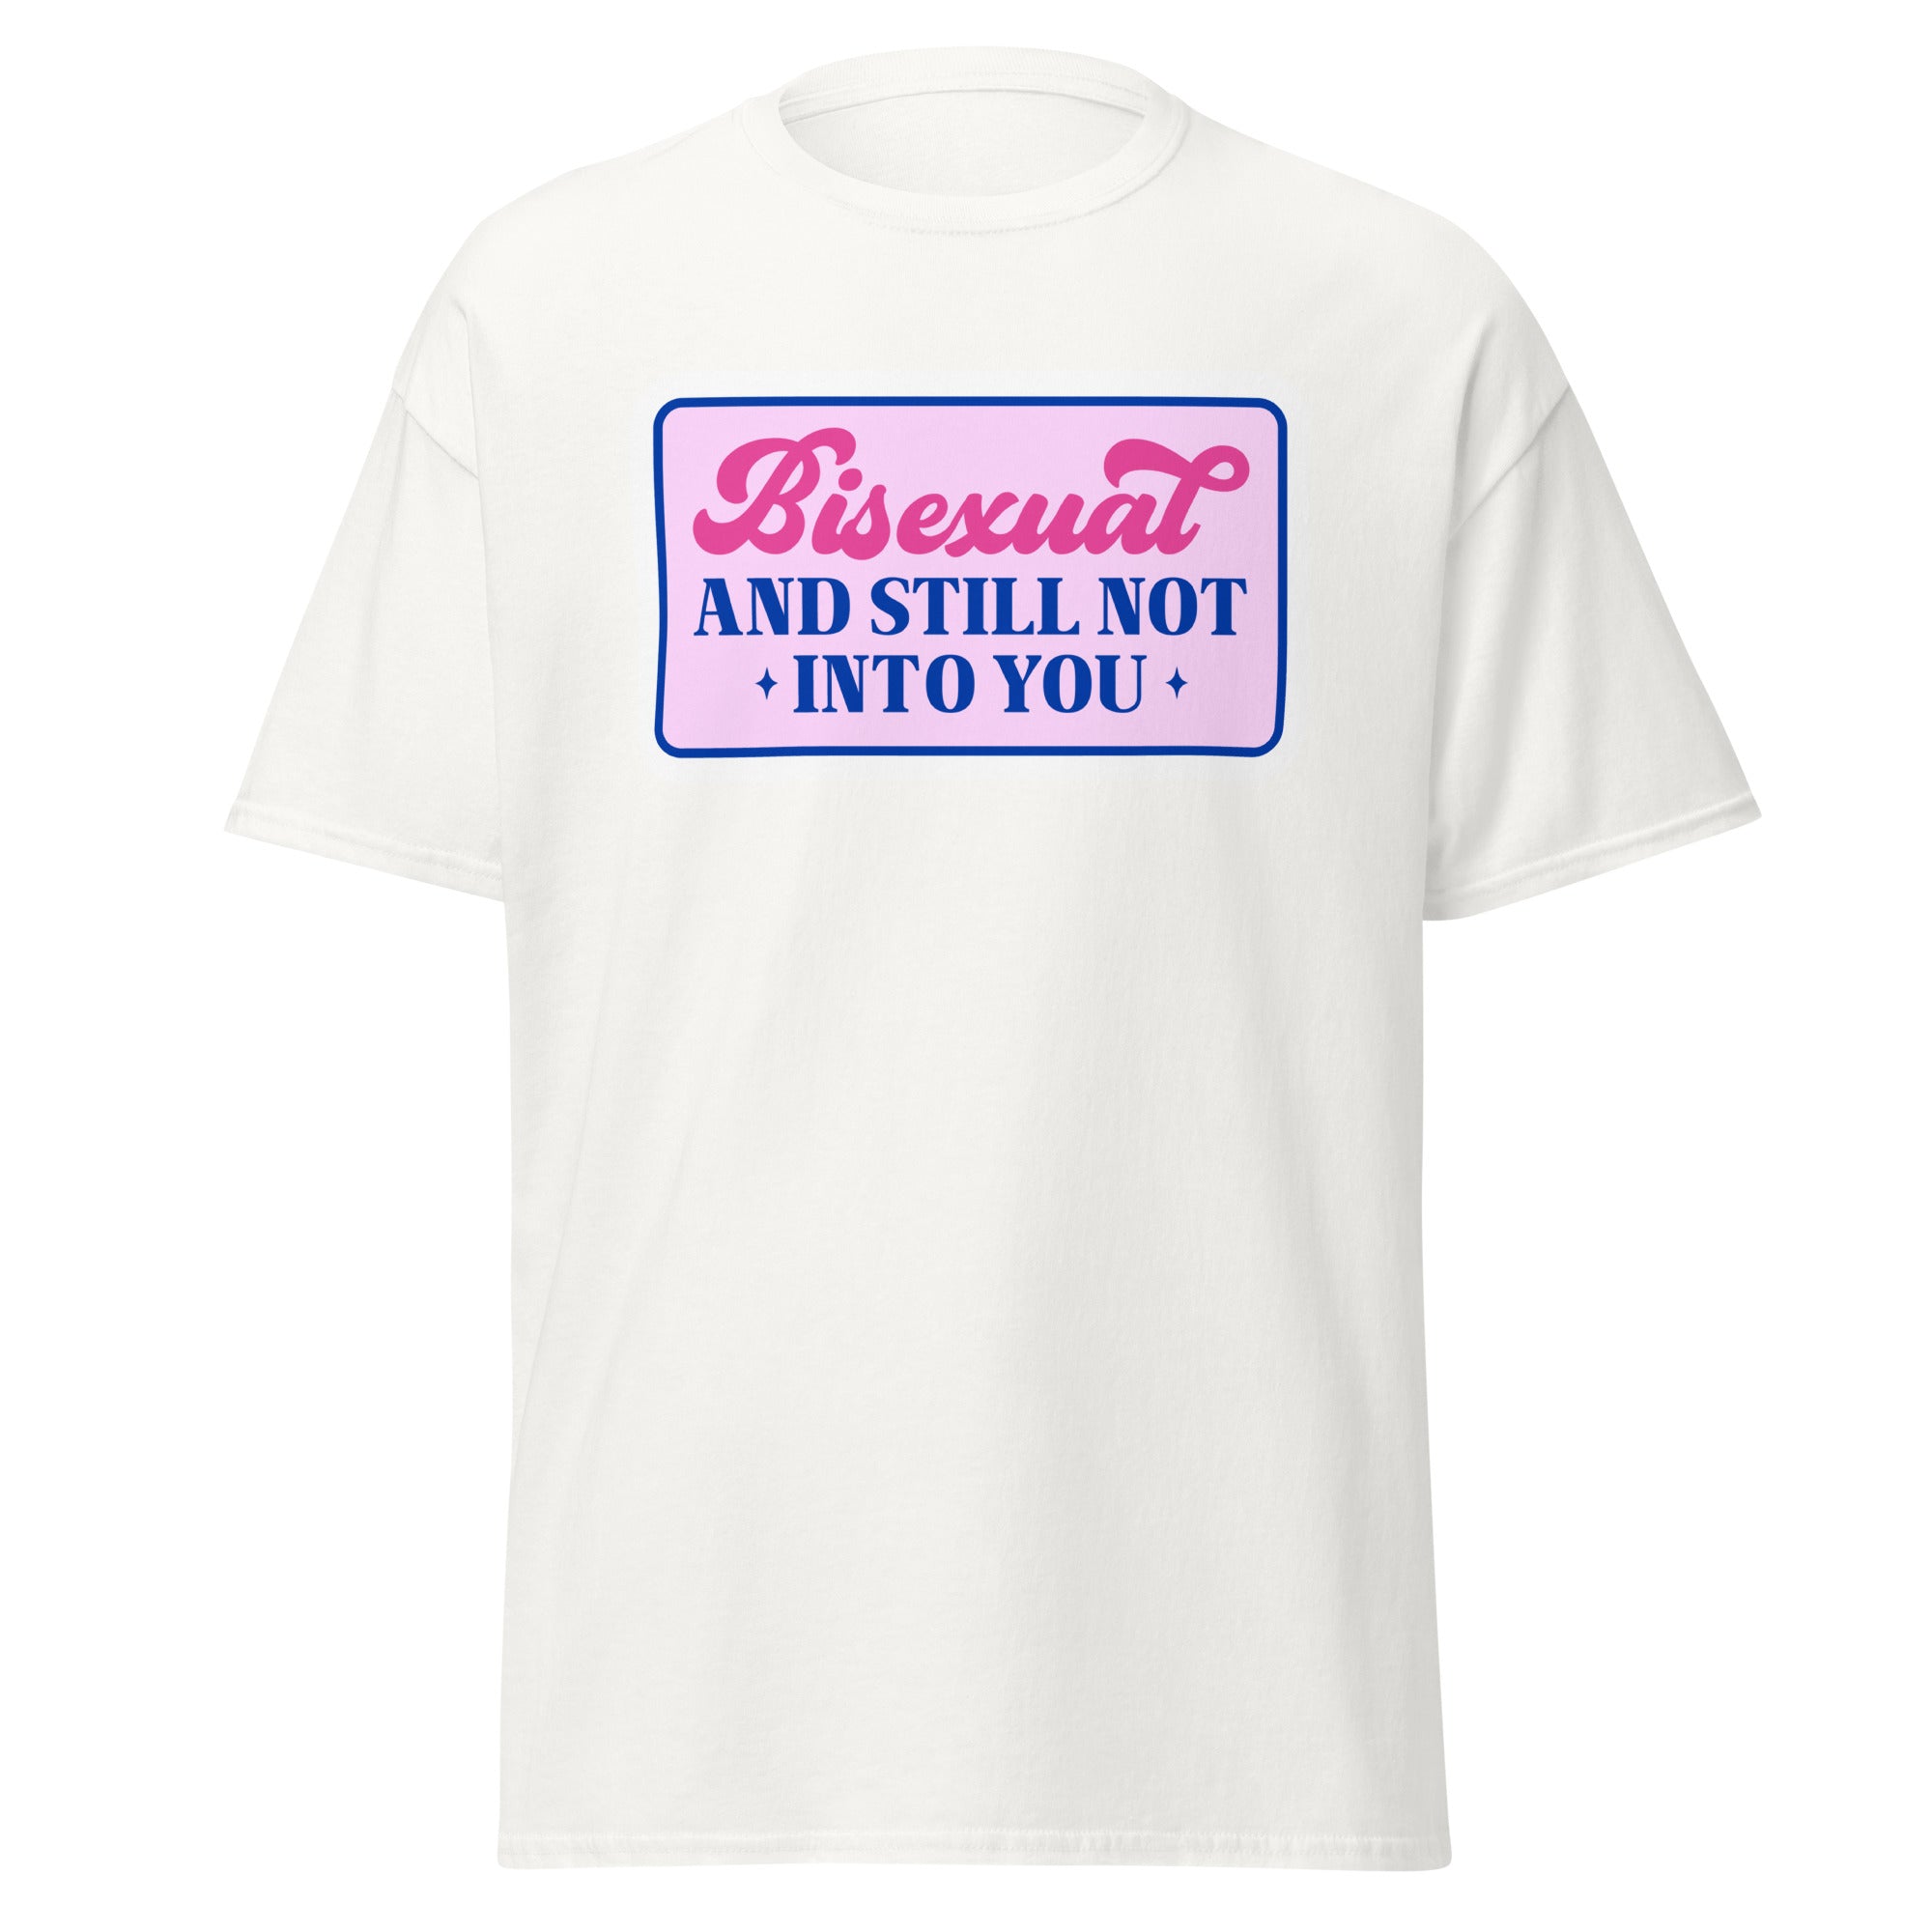 Bisexual AND STILL NOT INTO YOU Unisex T Shirt